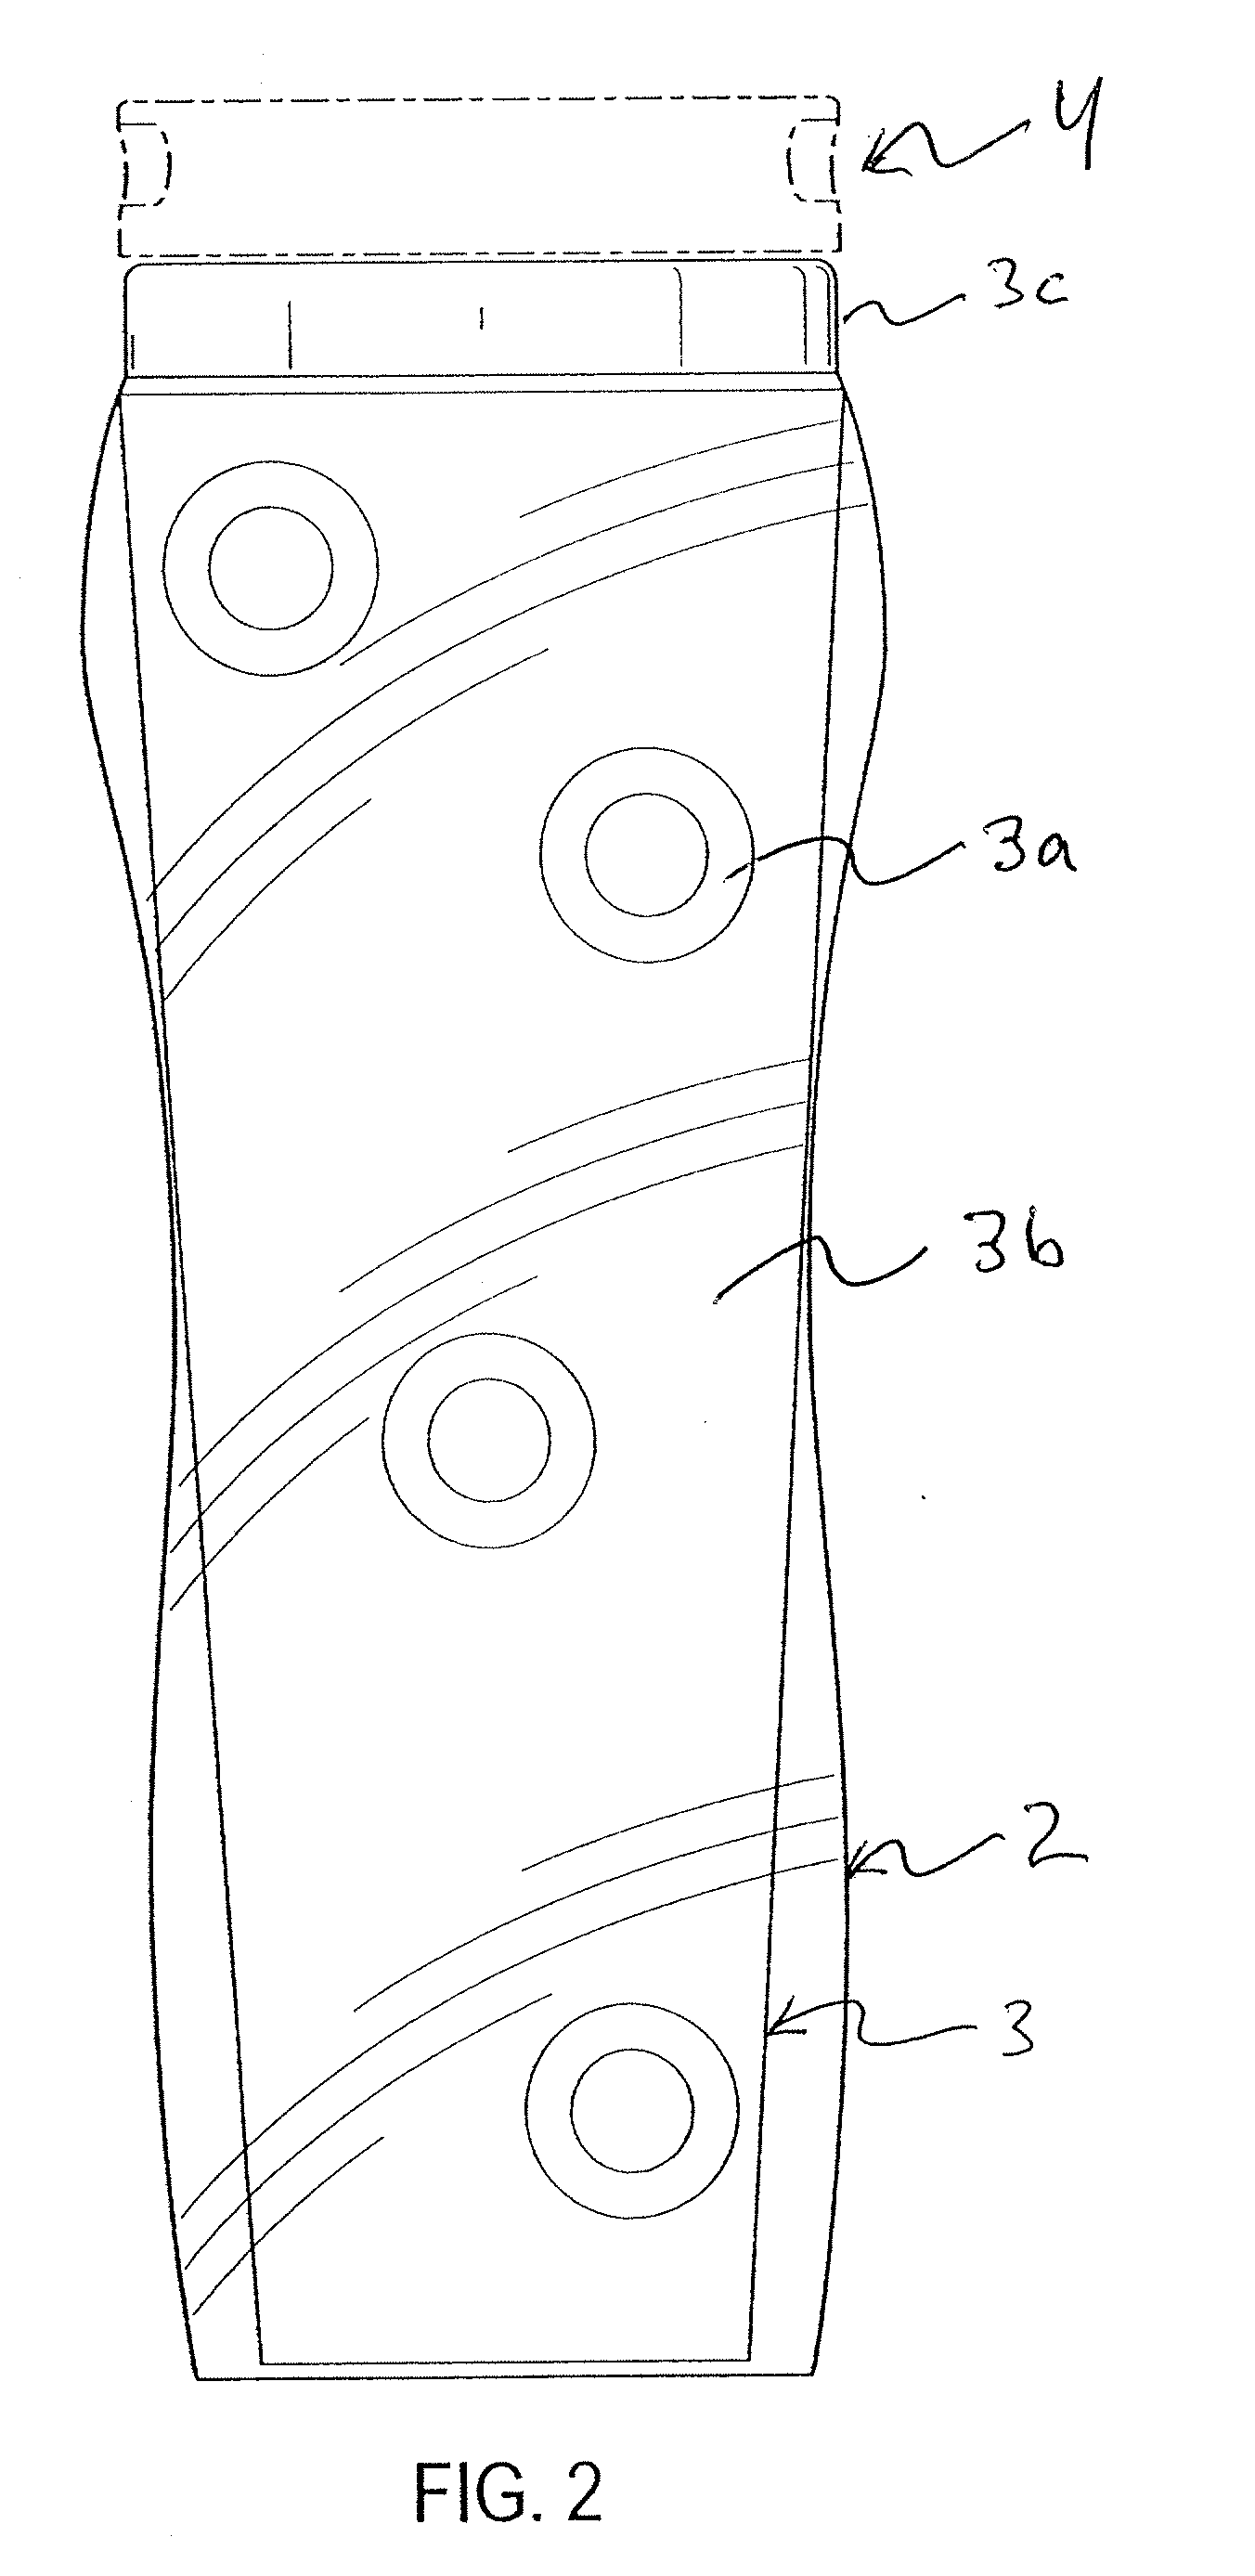 Dual- wall container with heat activated and/or temperature-change activated color changing capability